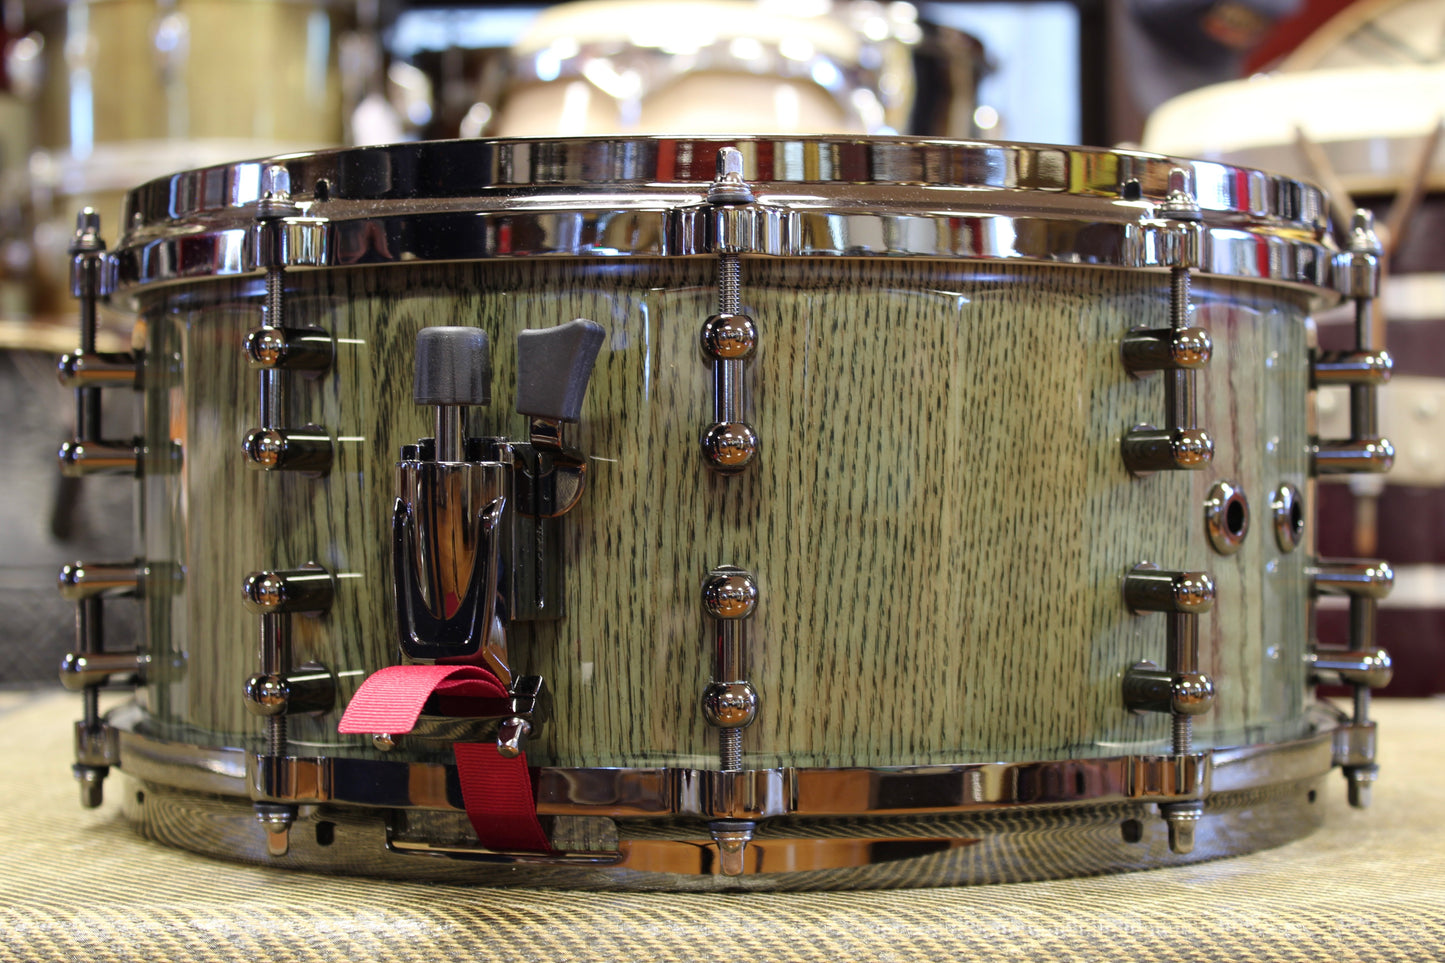 '21 AVA 6.5x14 Red Oak Stable Stave Snare Drum in High Gloss Green